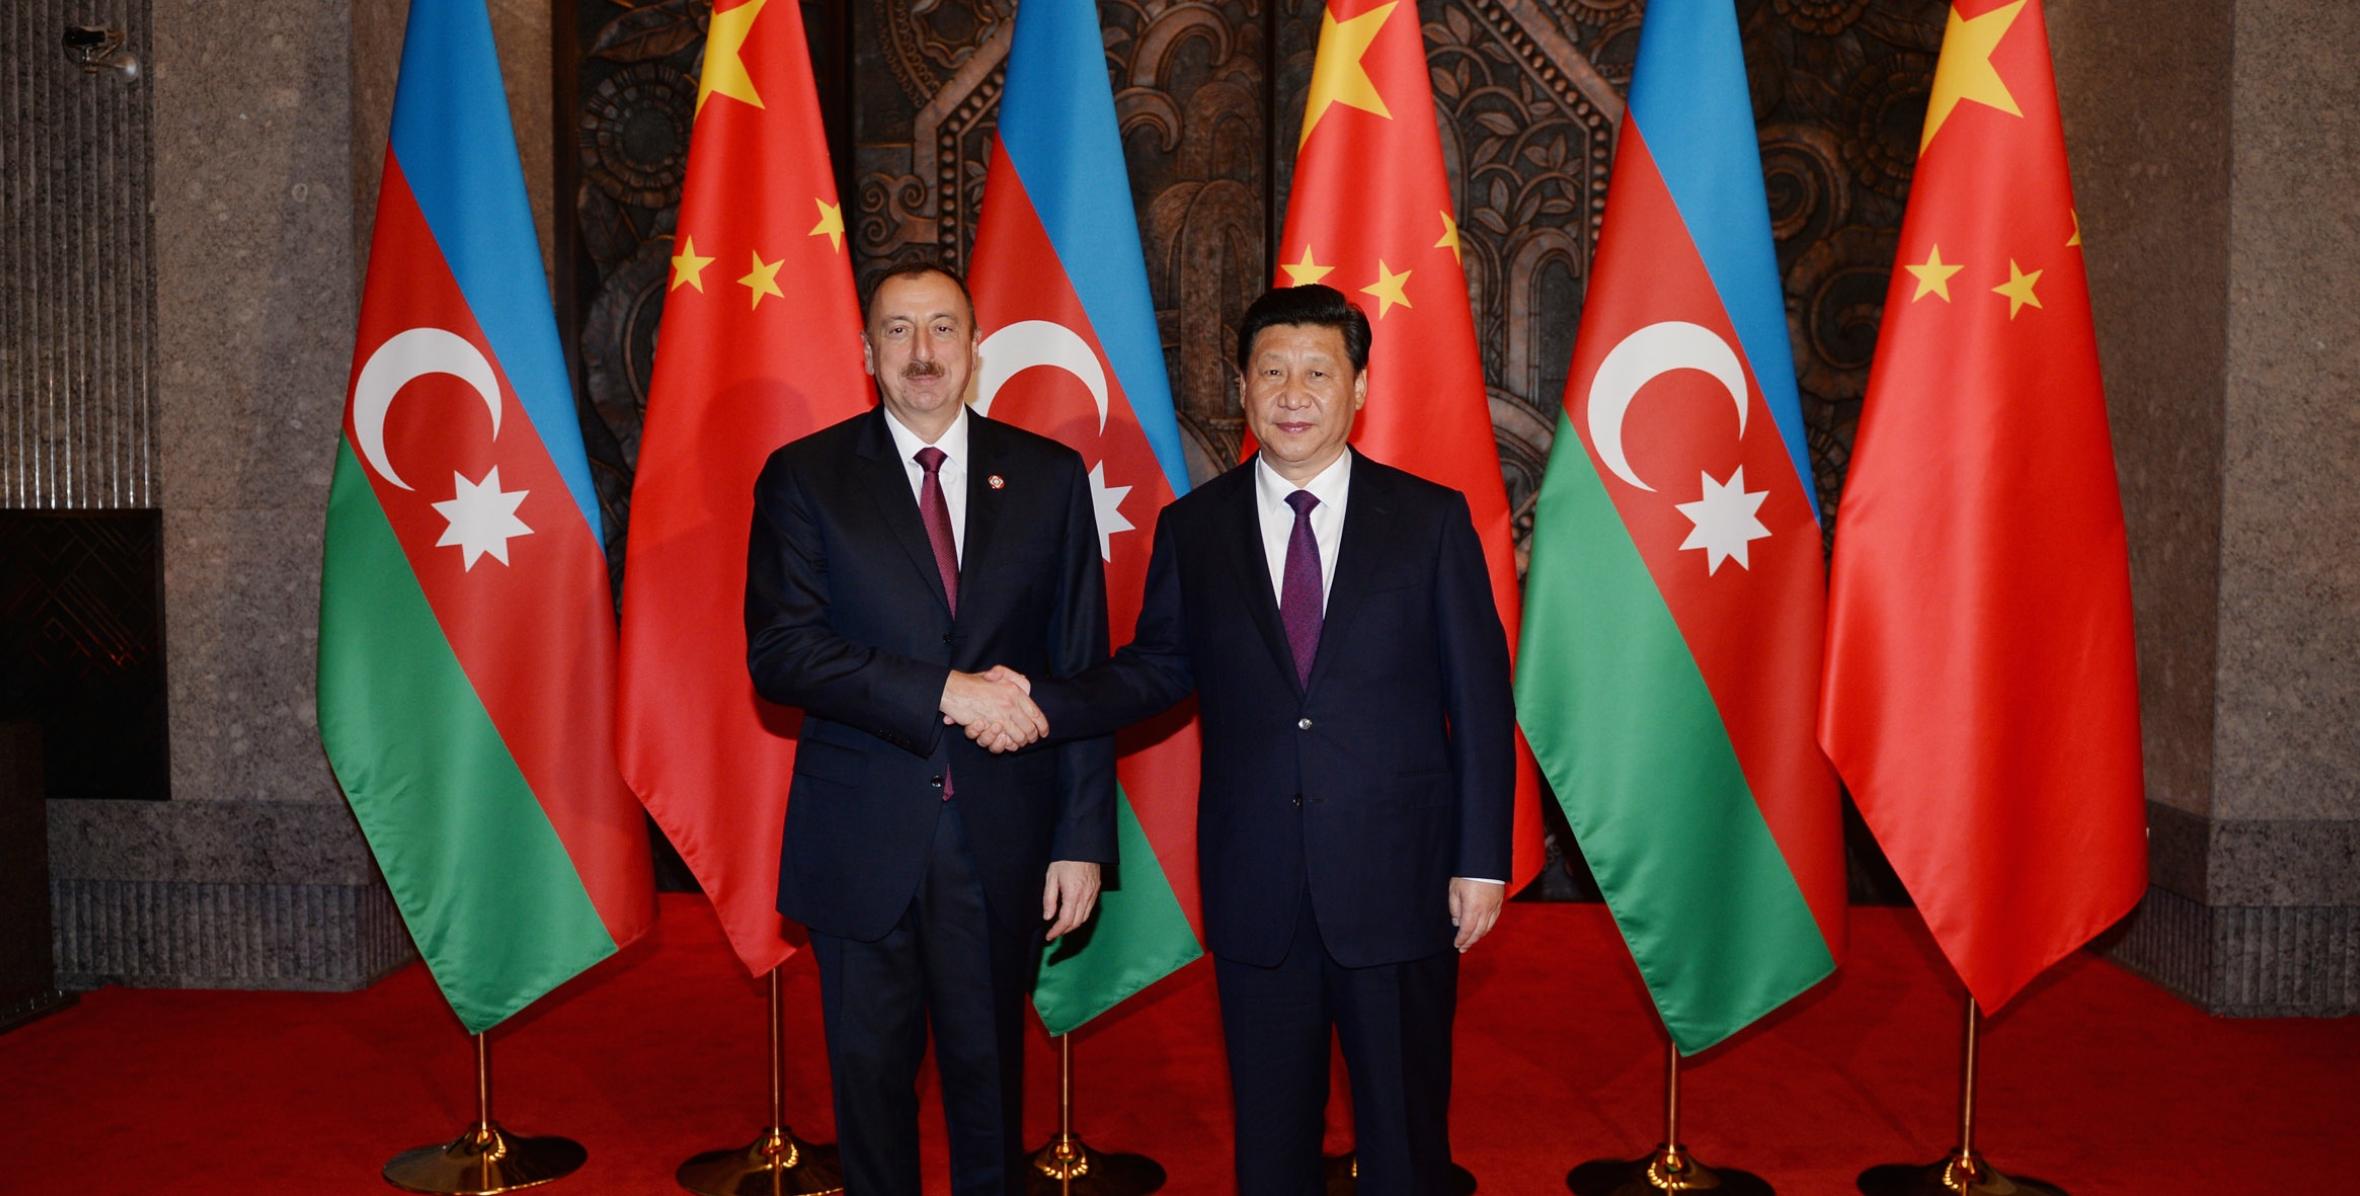 Ilham Aliyev met with President of the People's Republic of China Xi Jinping